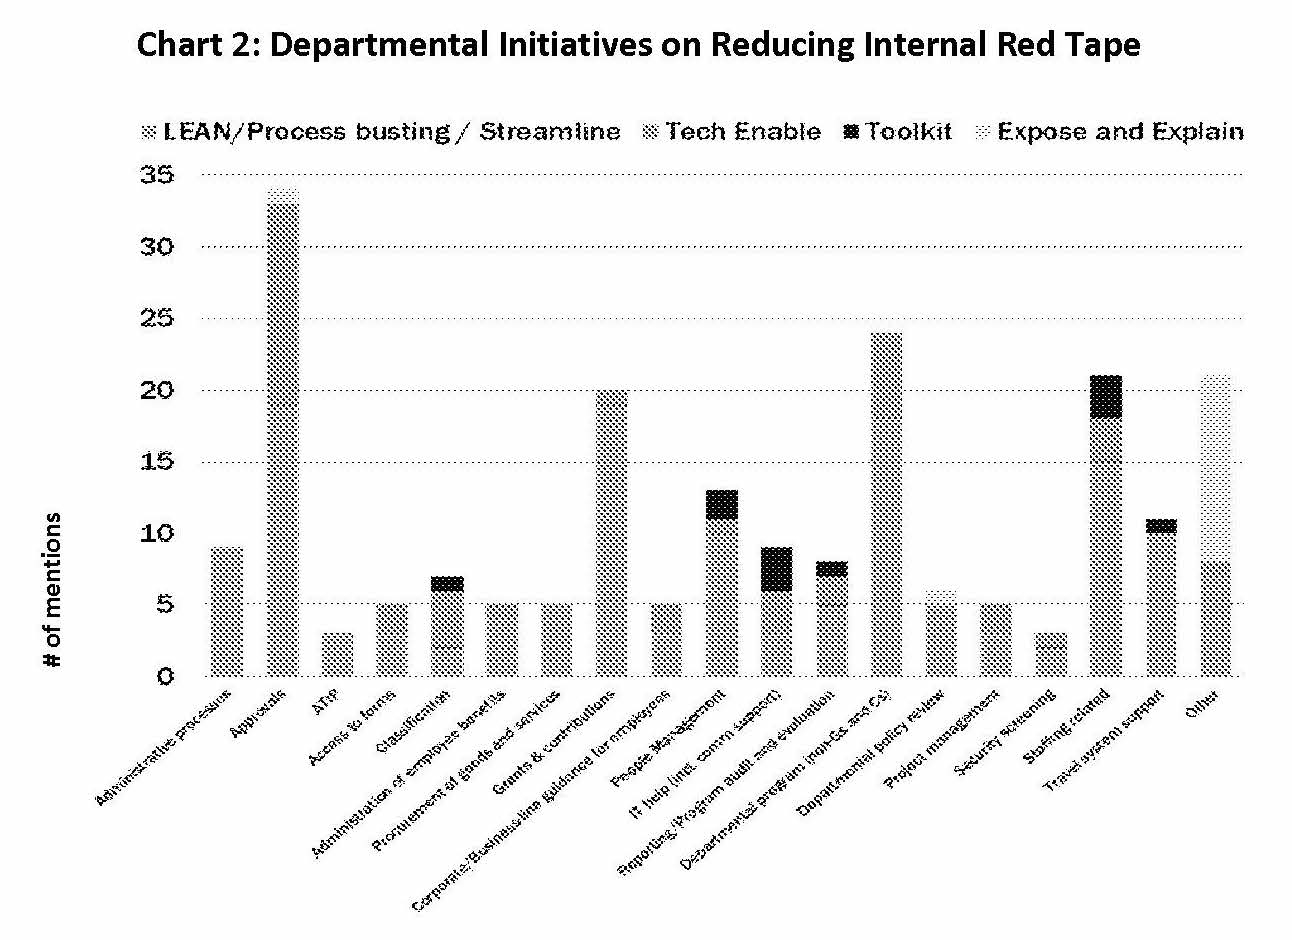 A chart of departmental initiatives to reduce internal red tape, including LEAN/process busting/streamlining, tech enablement, toolkits, or exposing and explaining.